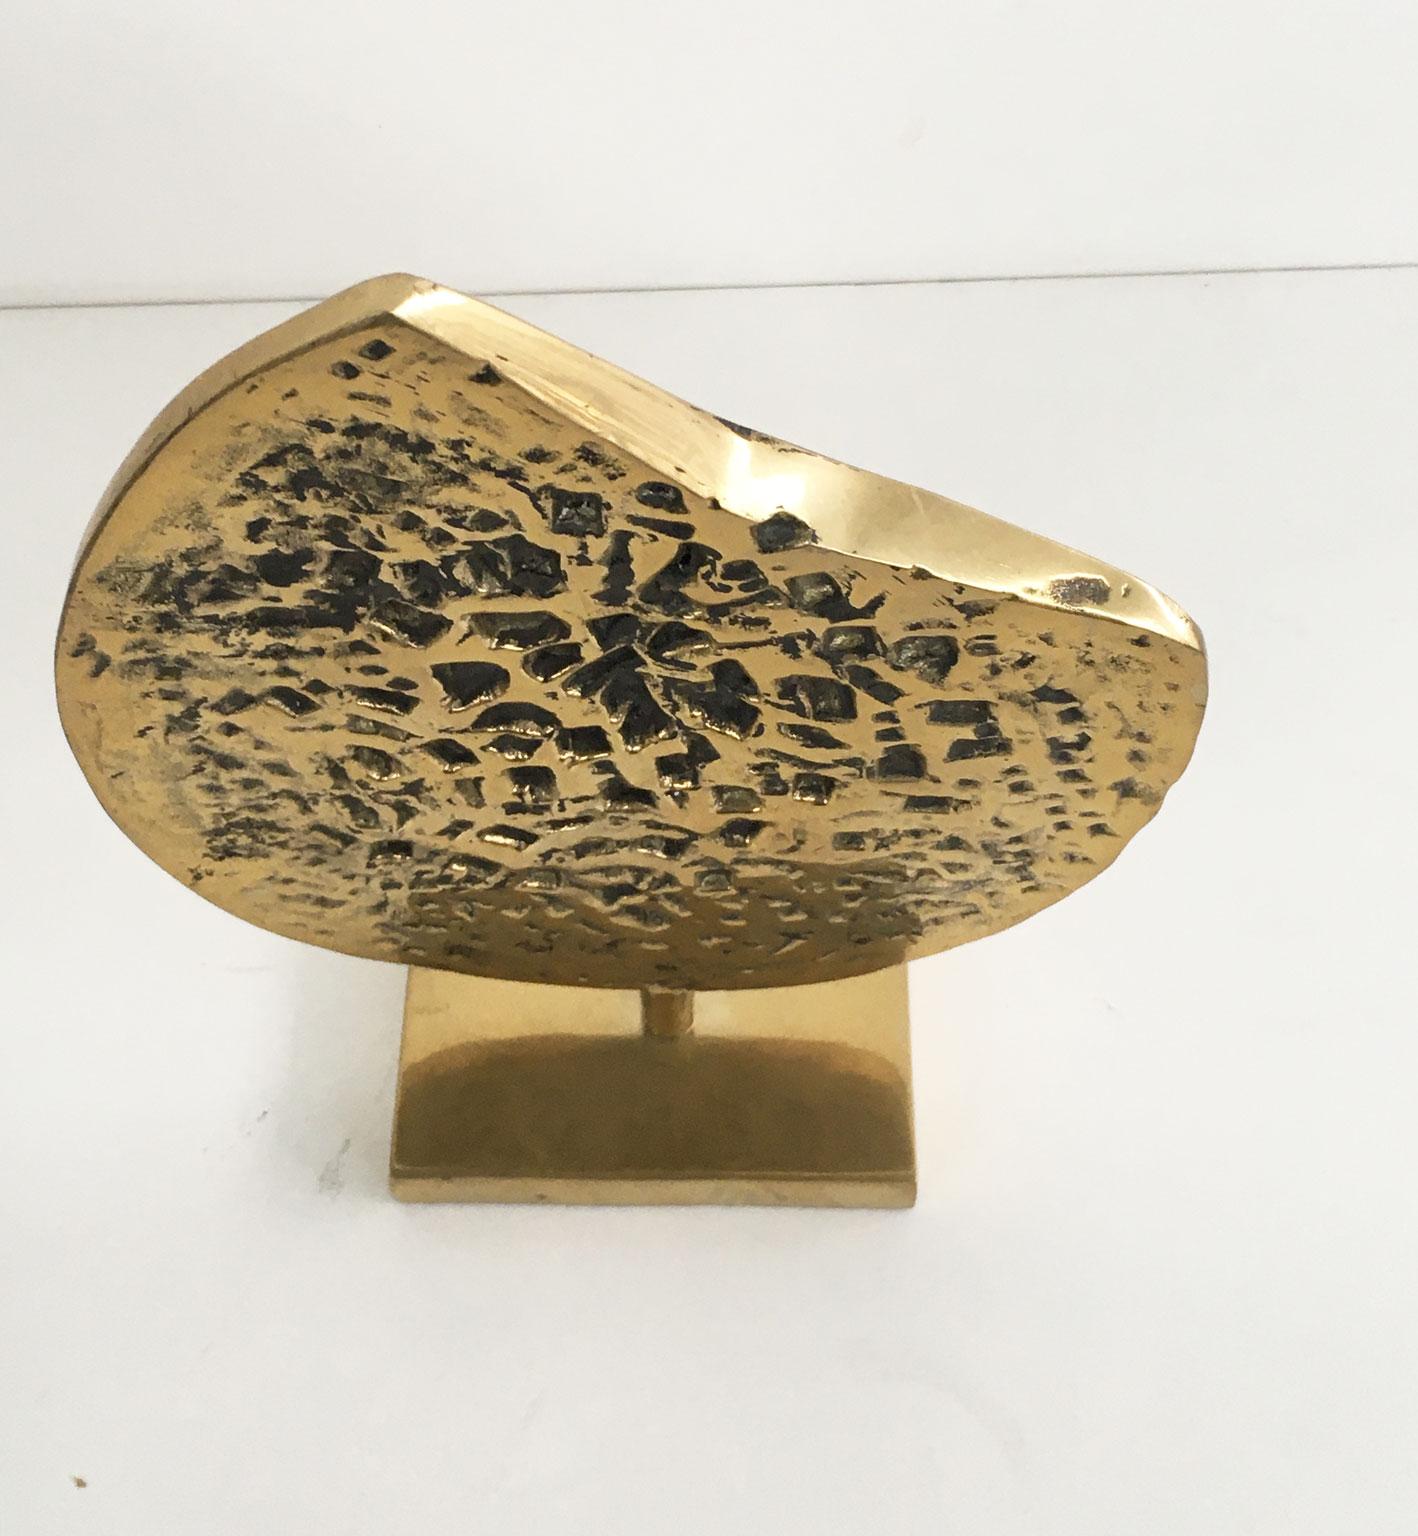 1980 Italy Bronze Abstract Sculpture by Lino Tiné Albero Città City Tree For Sale 11